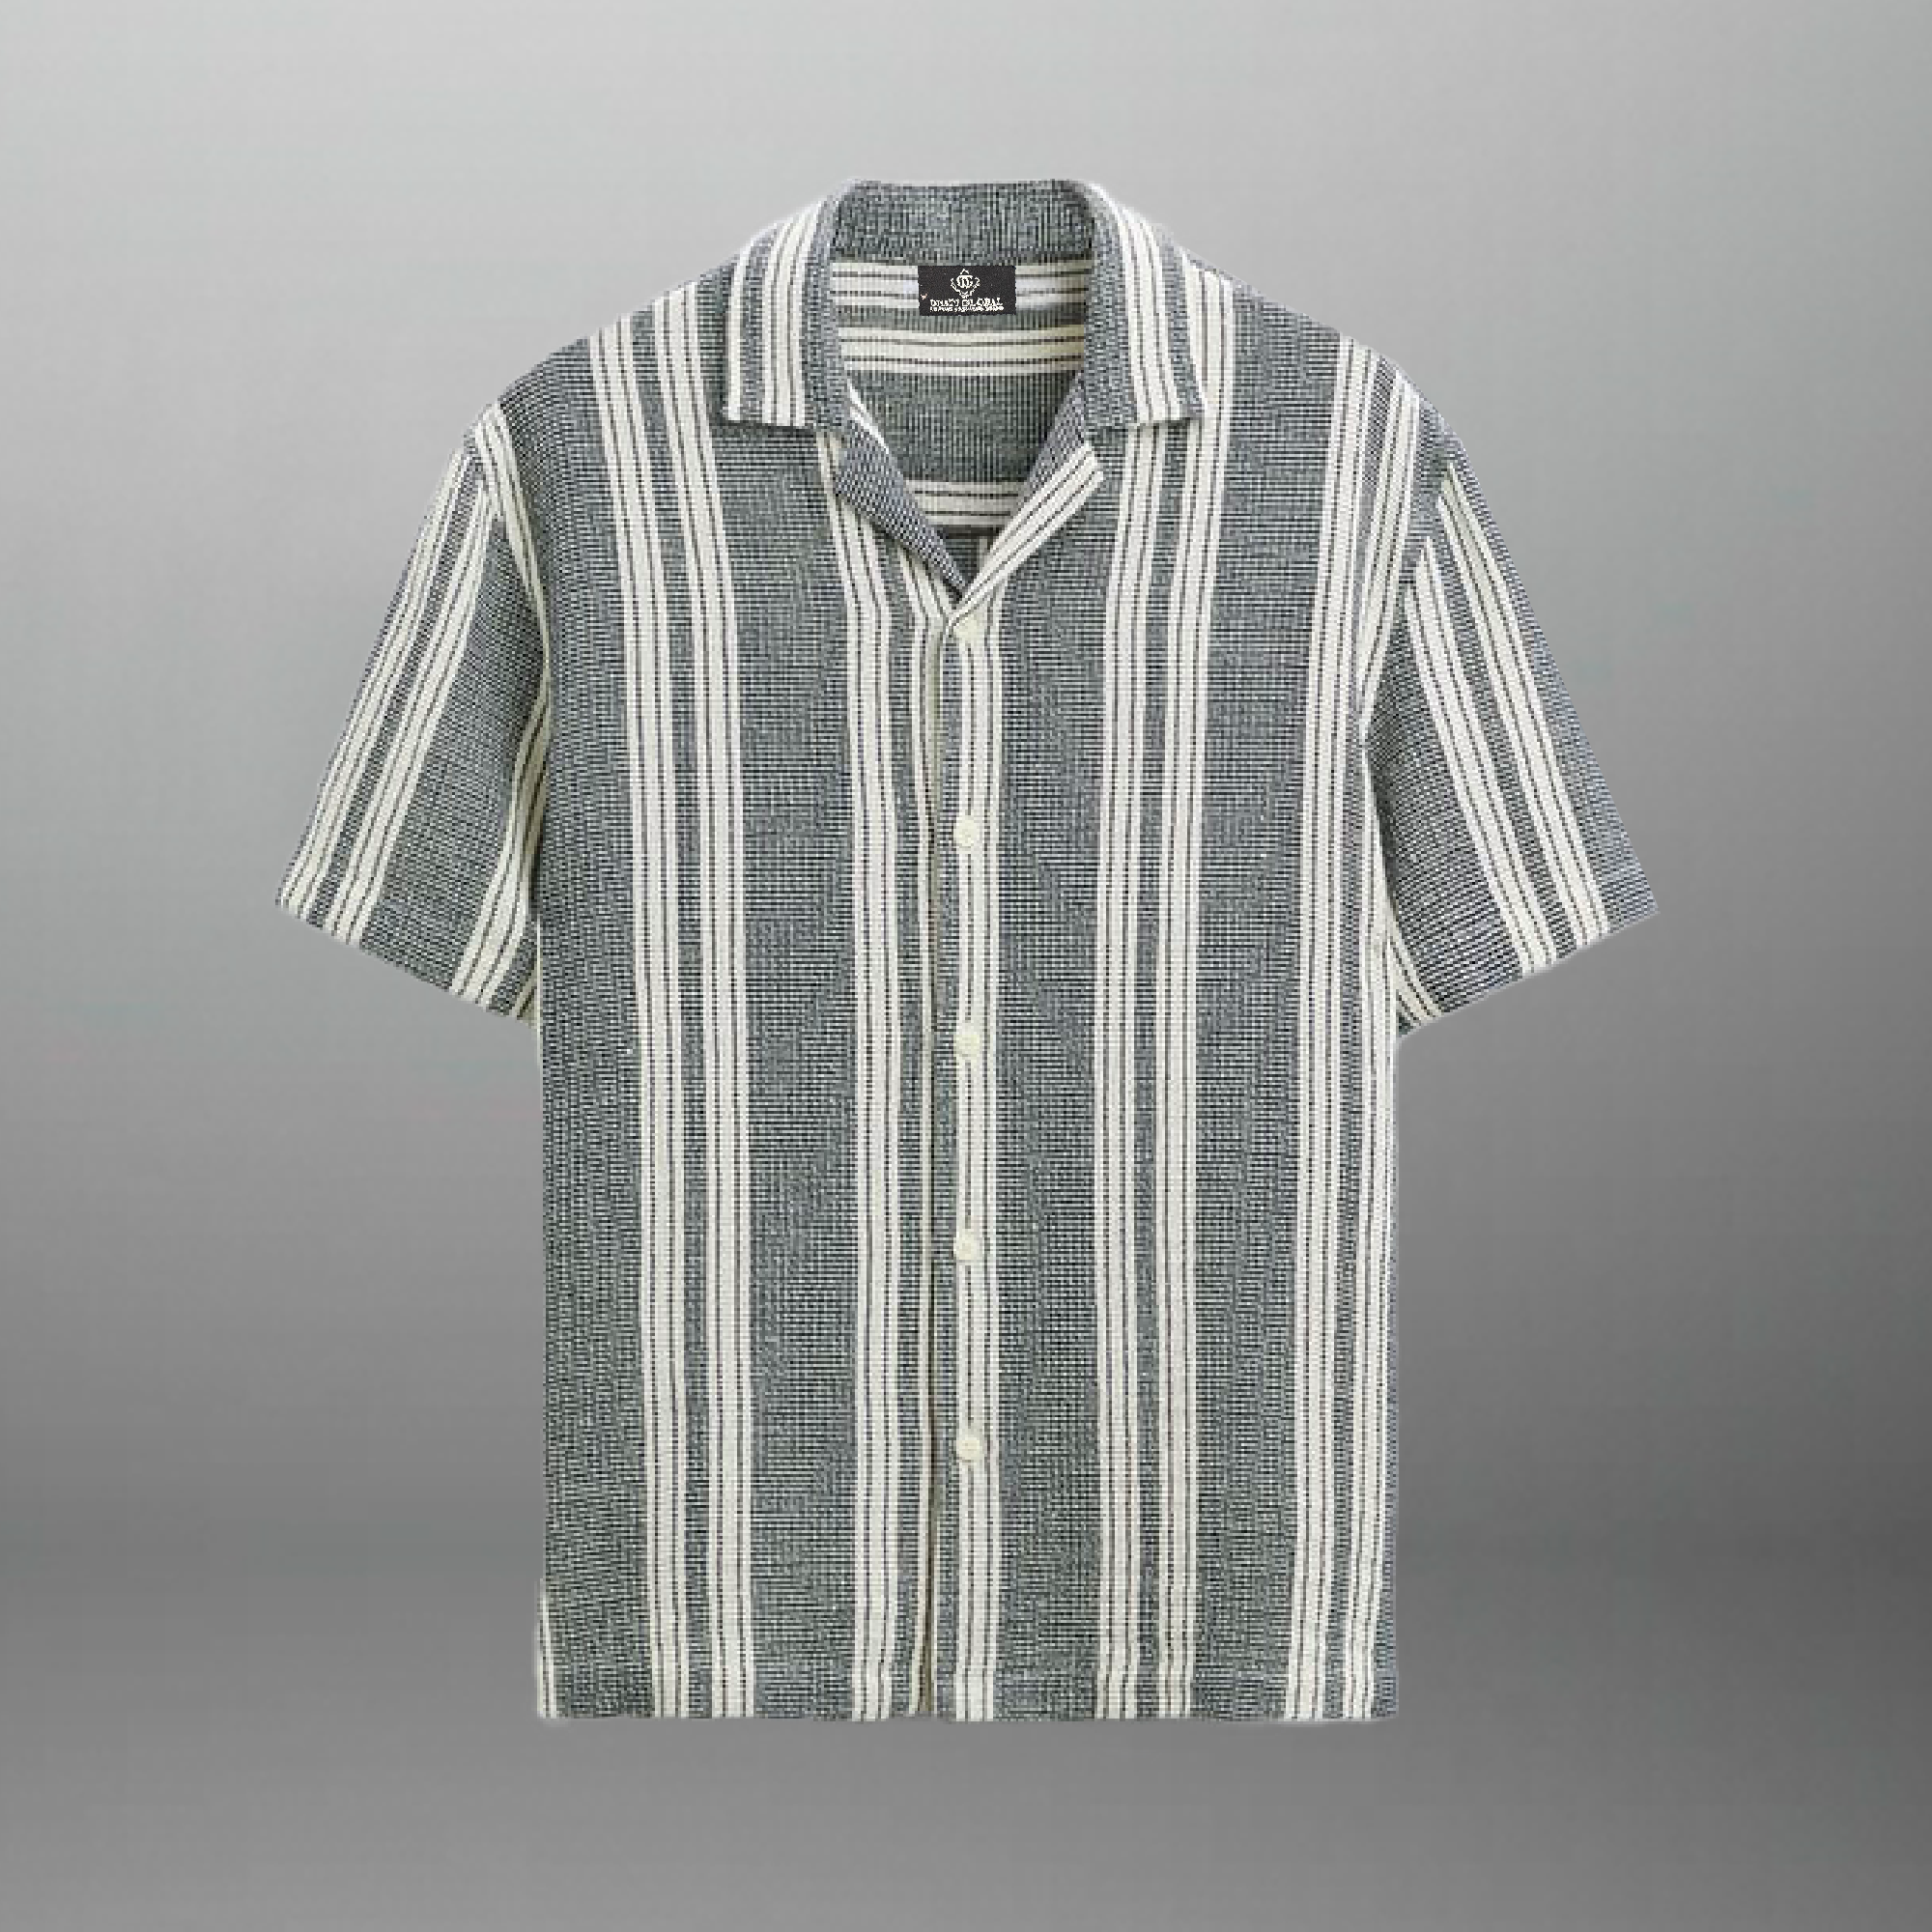 Men's Cotton Charcoal Grey & White colored striped shirt-RMS018